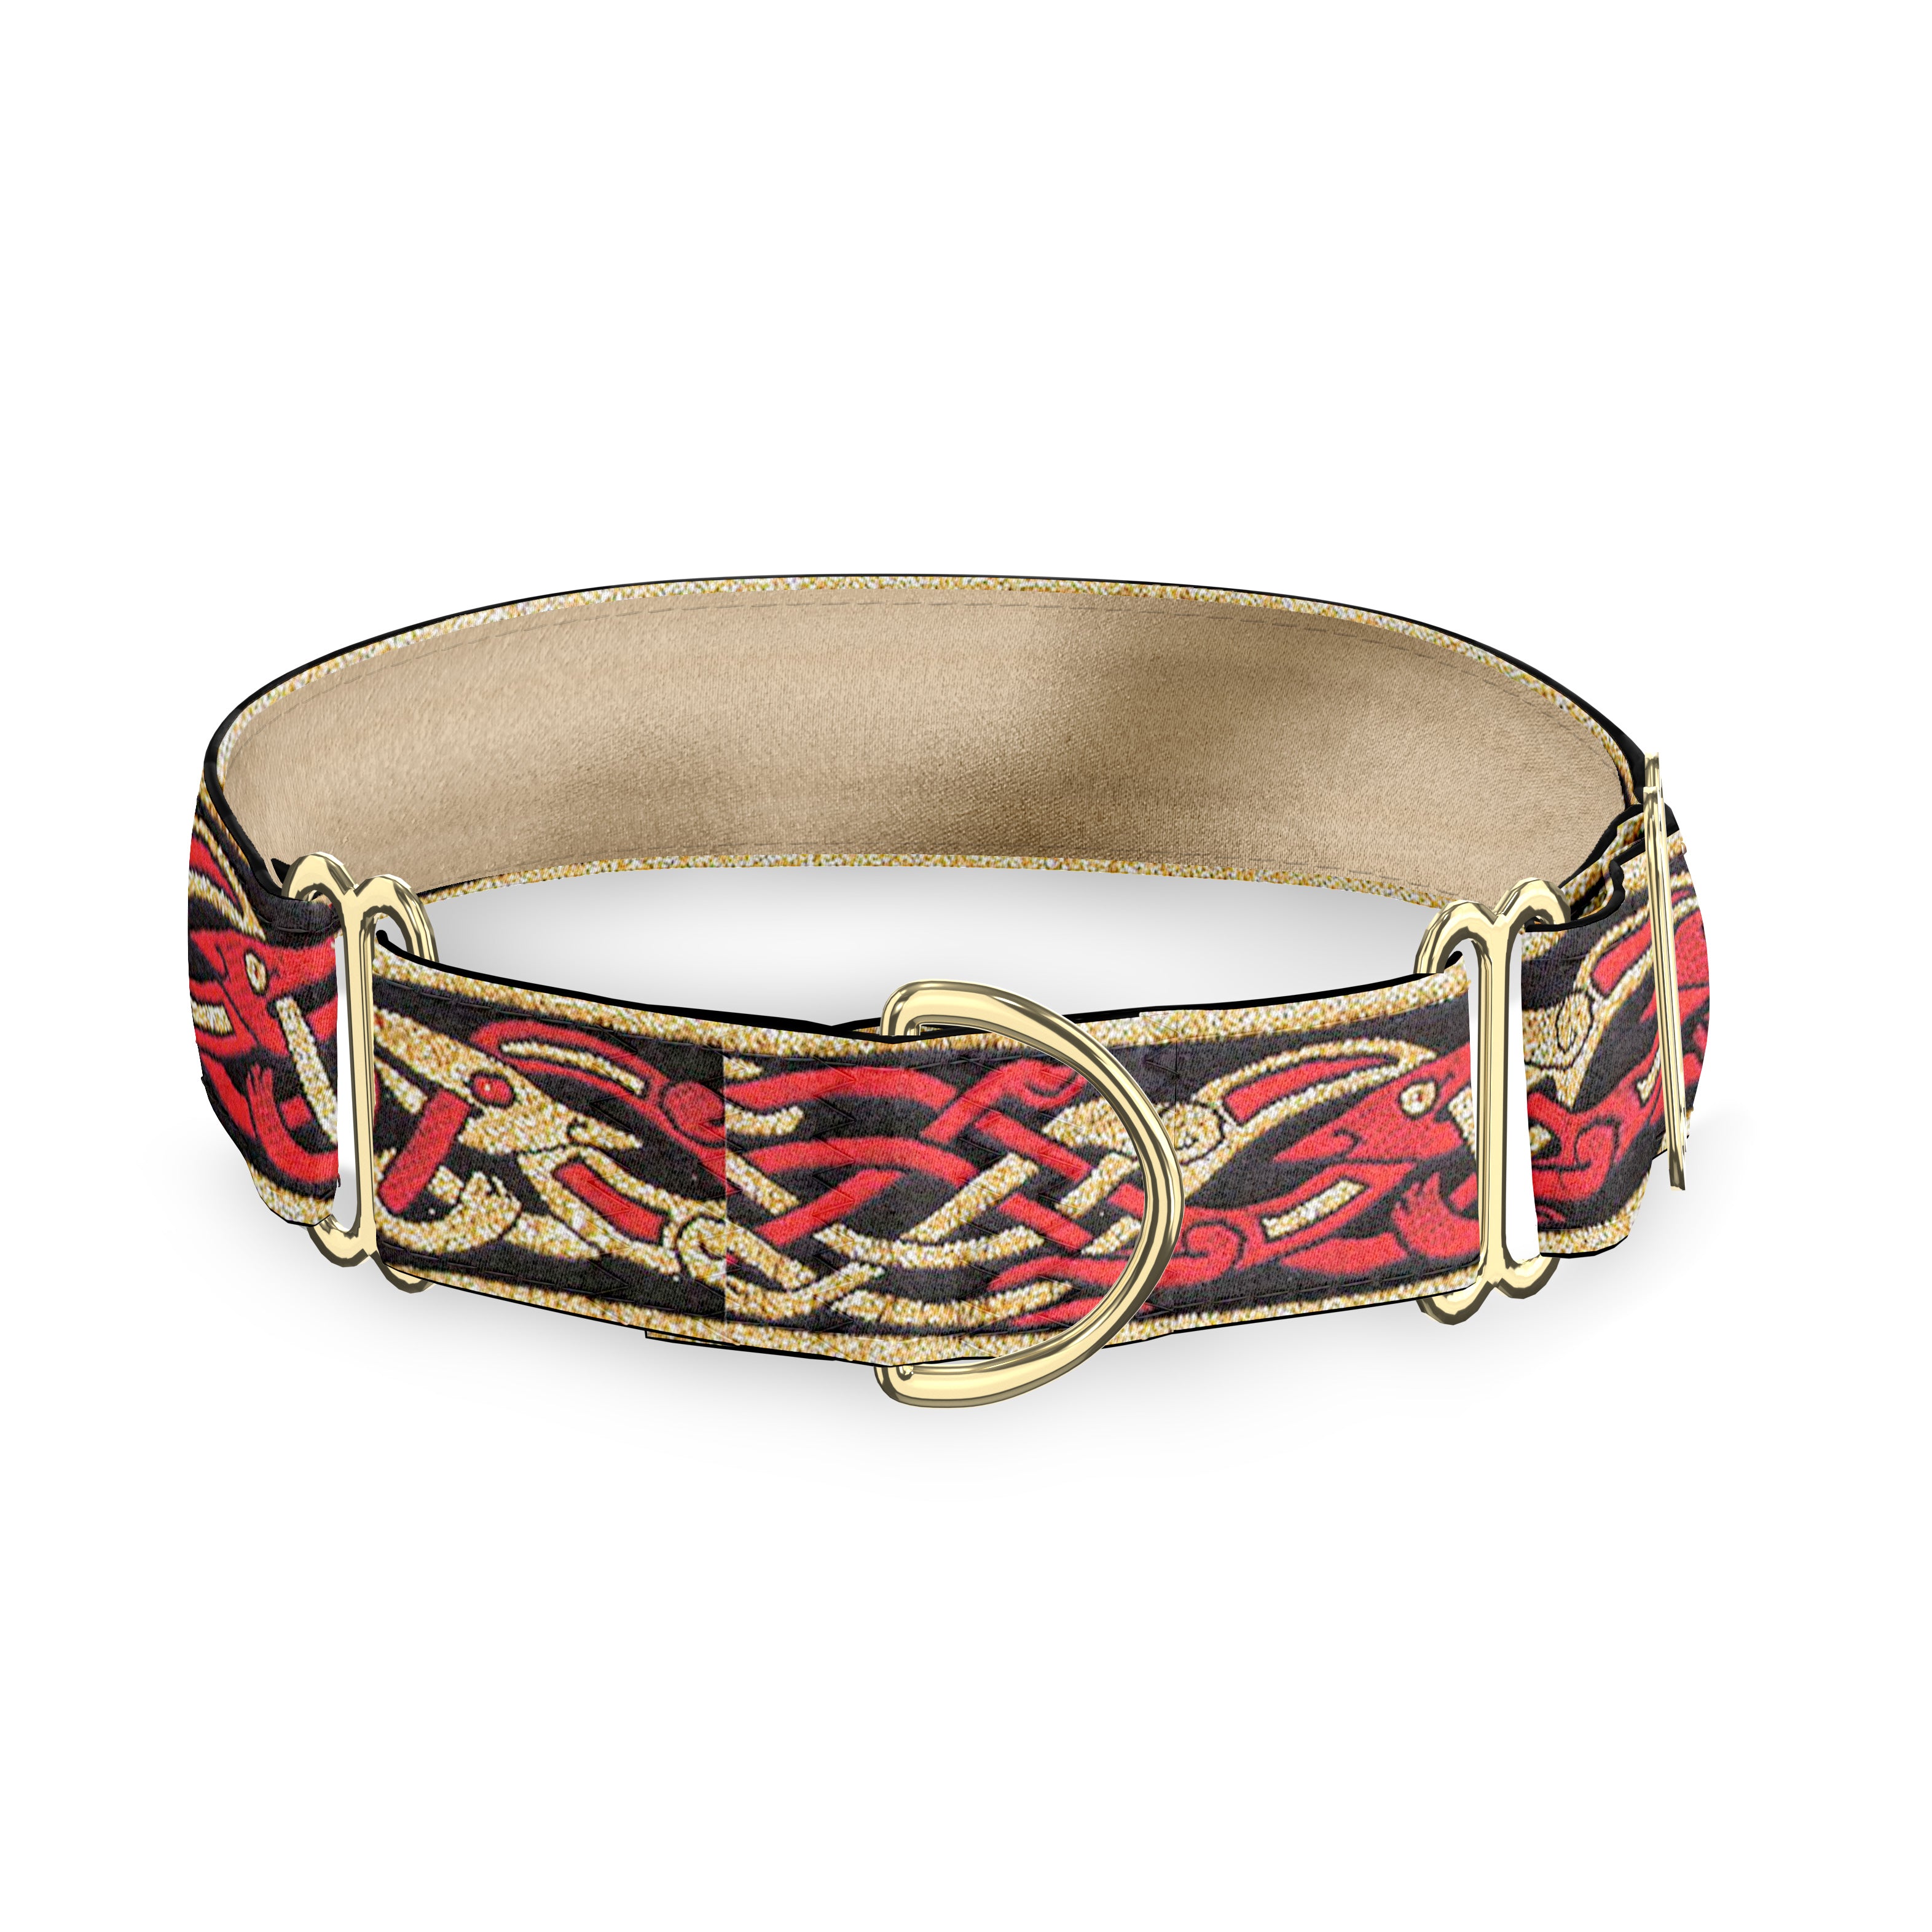 Kells Hounds Red and Gold 2 Inch Masterpiece Dog Collar